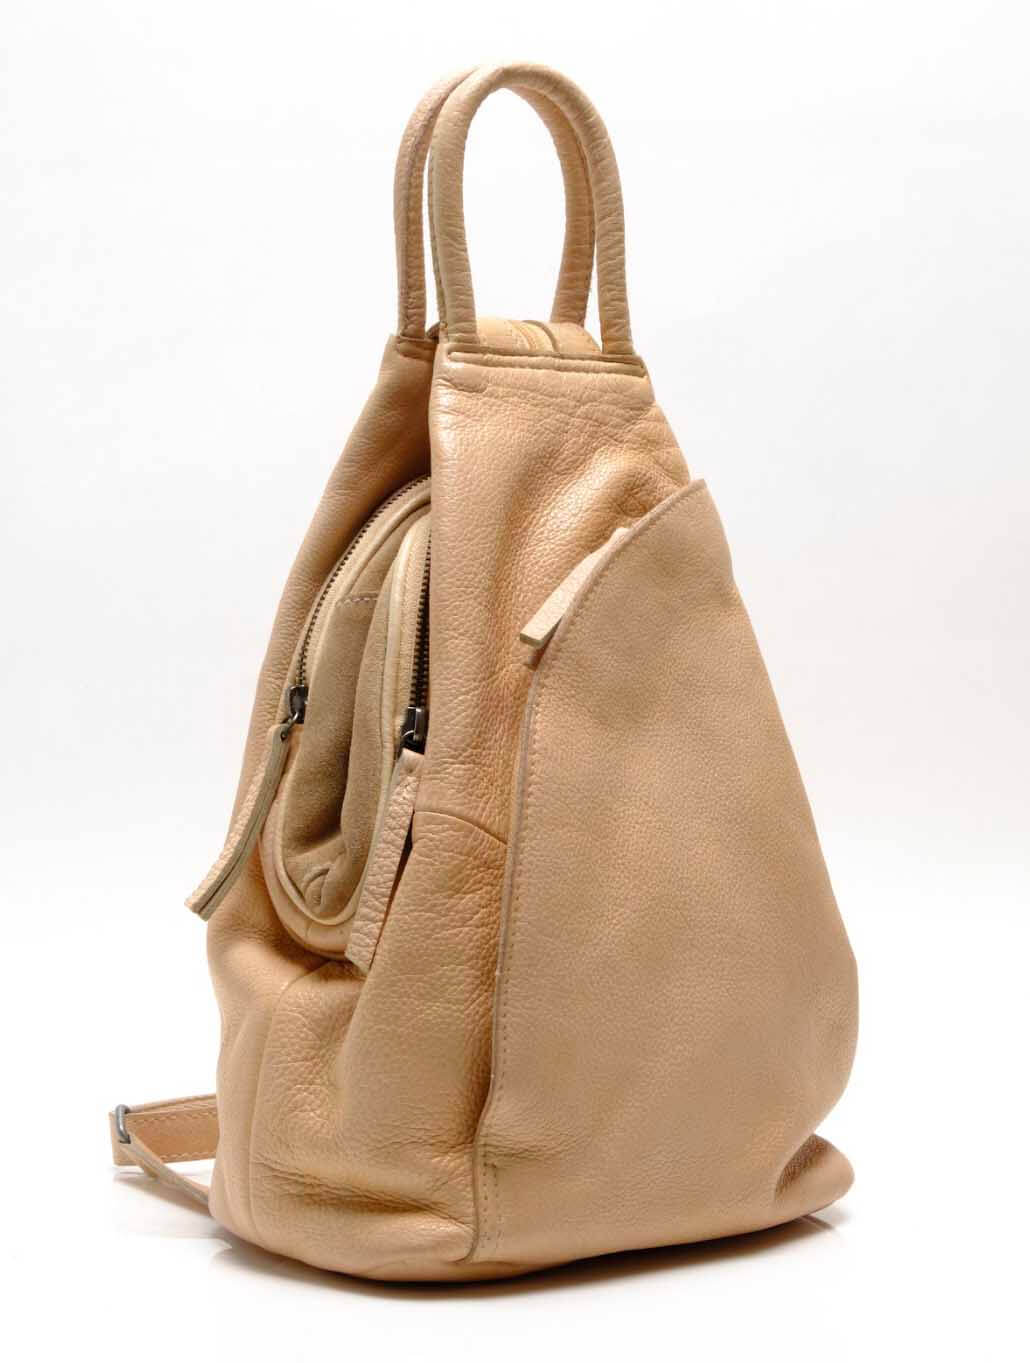 Free People WTF Soho Convertible Bag in Pale Peach